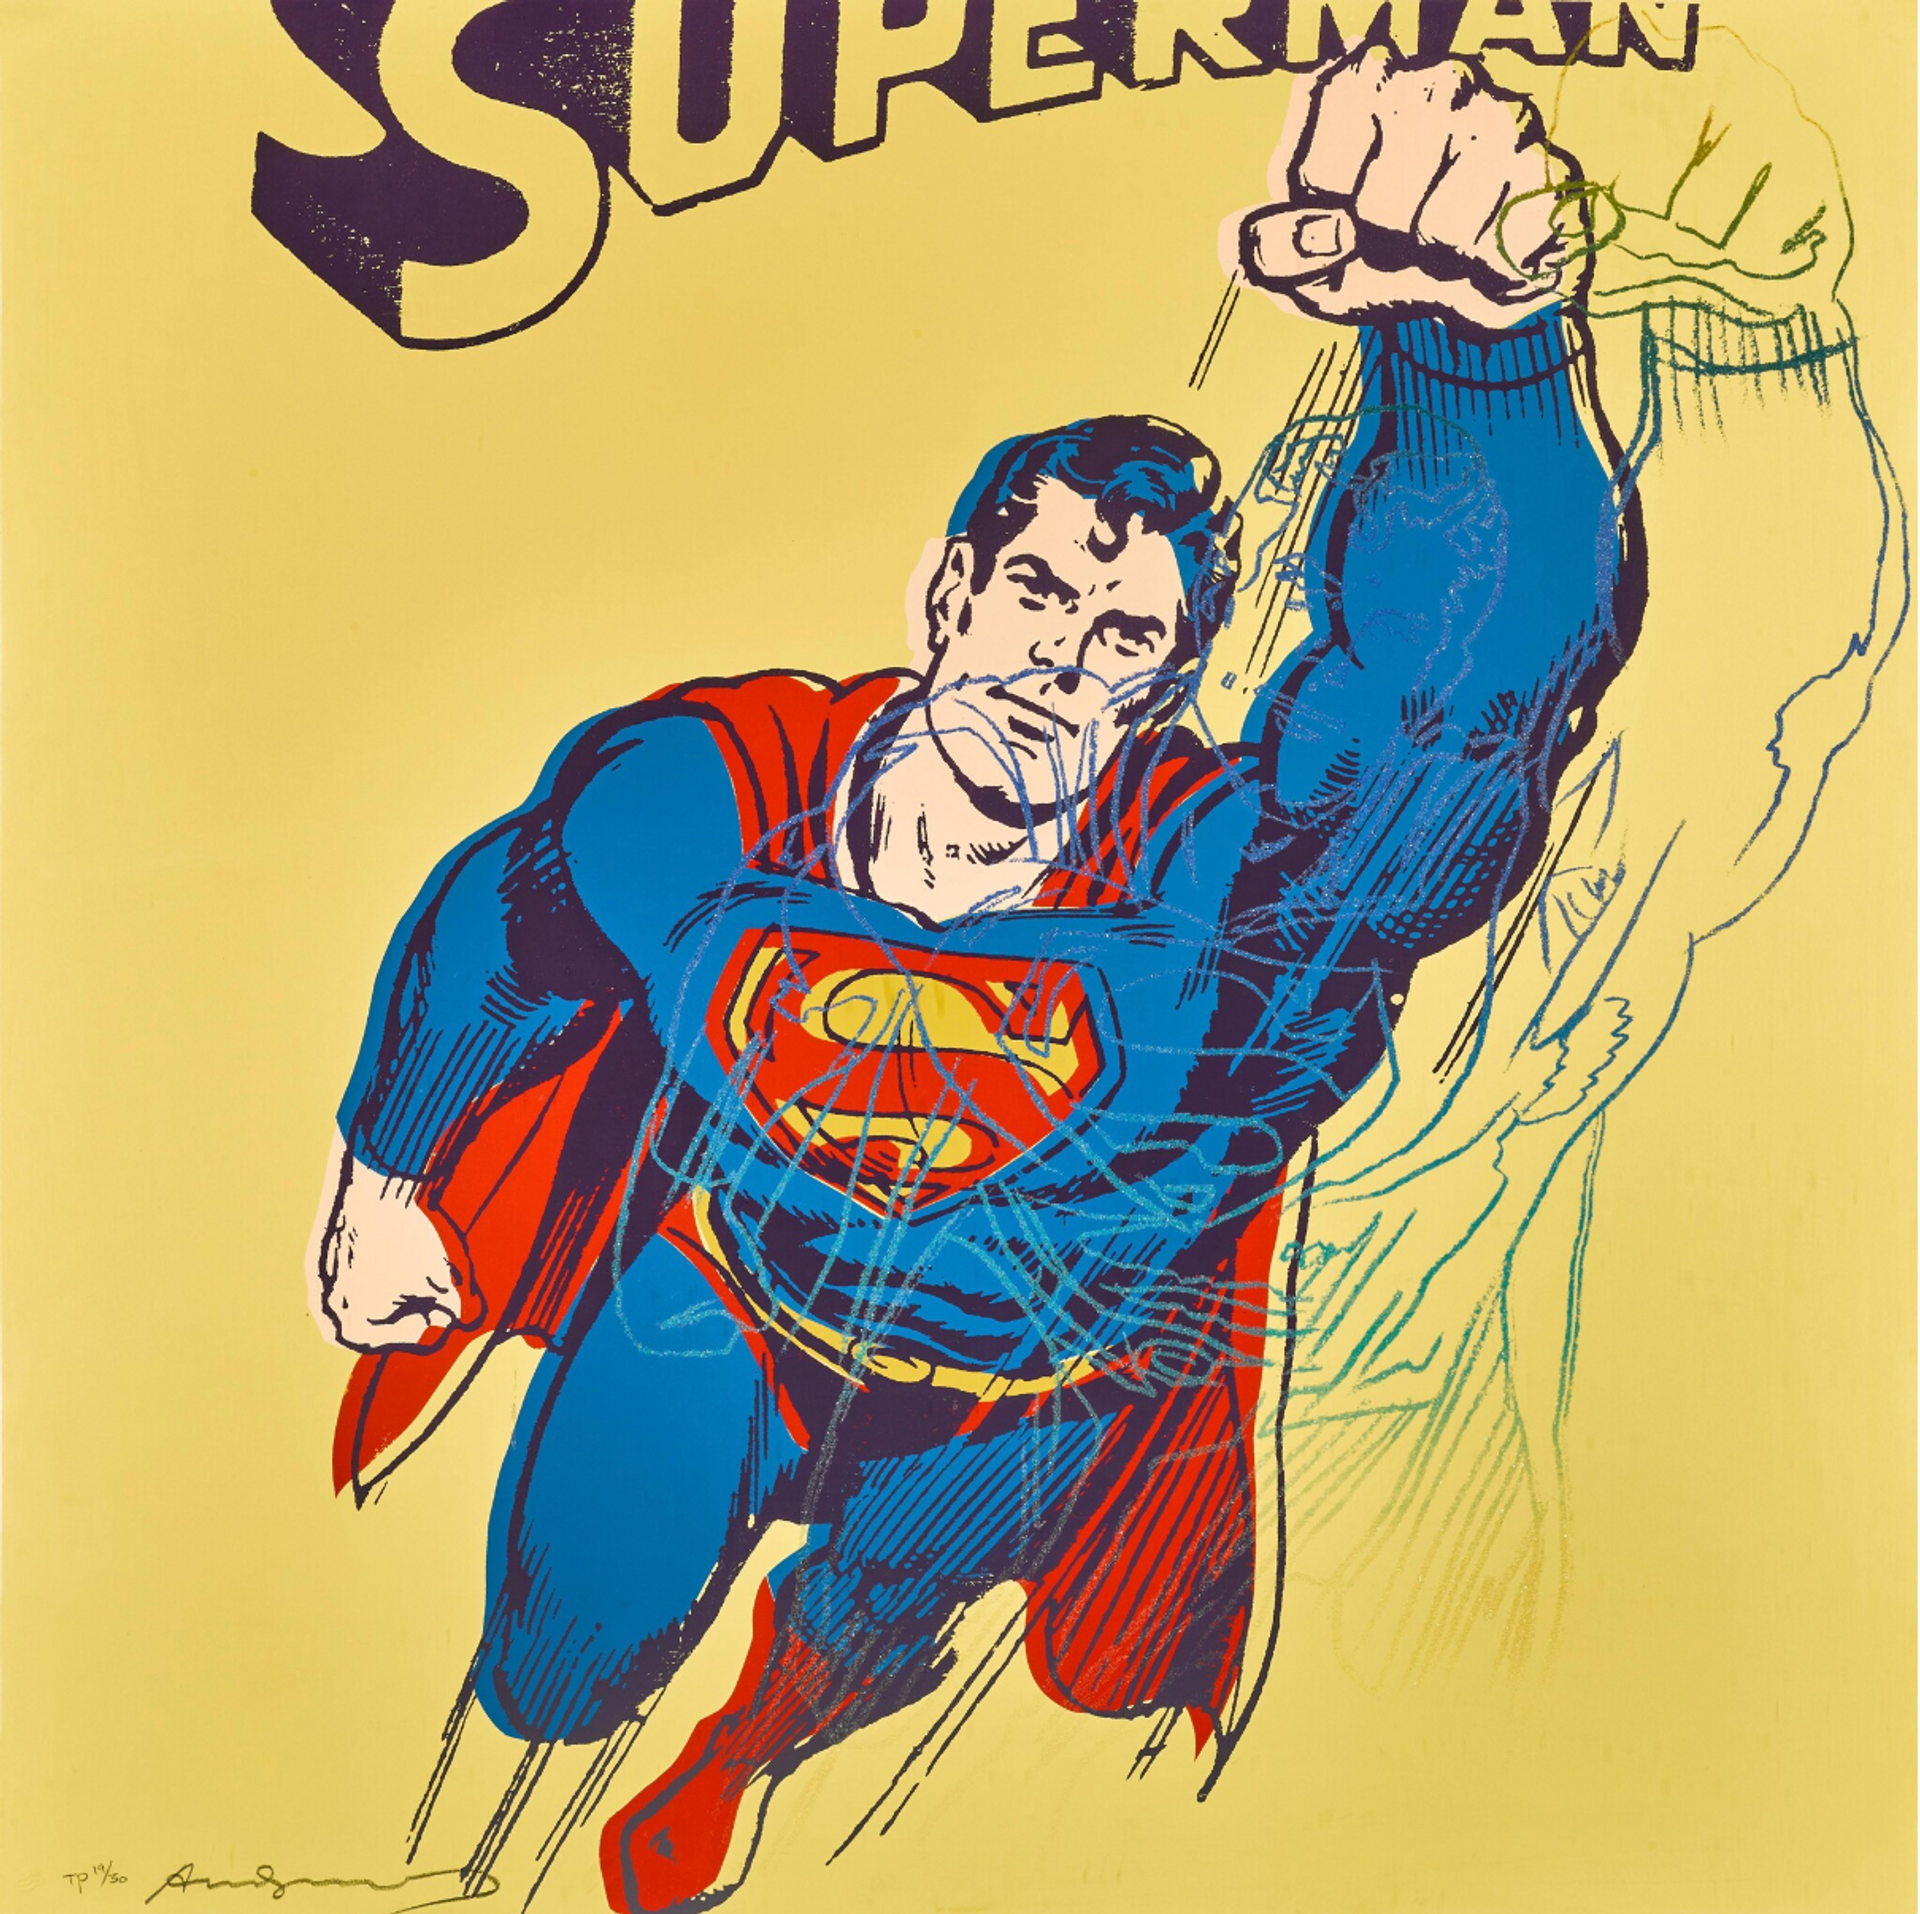 A screenprint by Andy Warhol depicting Superman reaching out to the viewer. The figure's arm extends to the top right of the composition towards the name “SUPERMAN”, which is cut off at the top of the work, set against a yellow background.